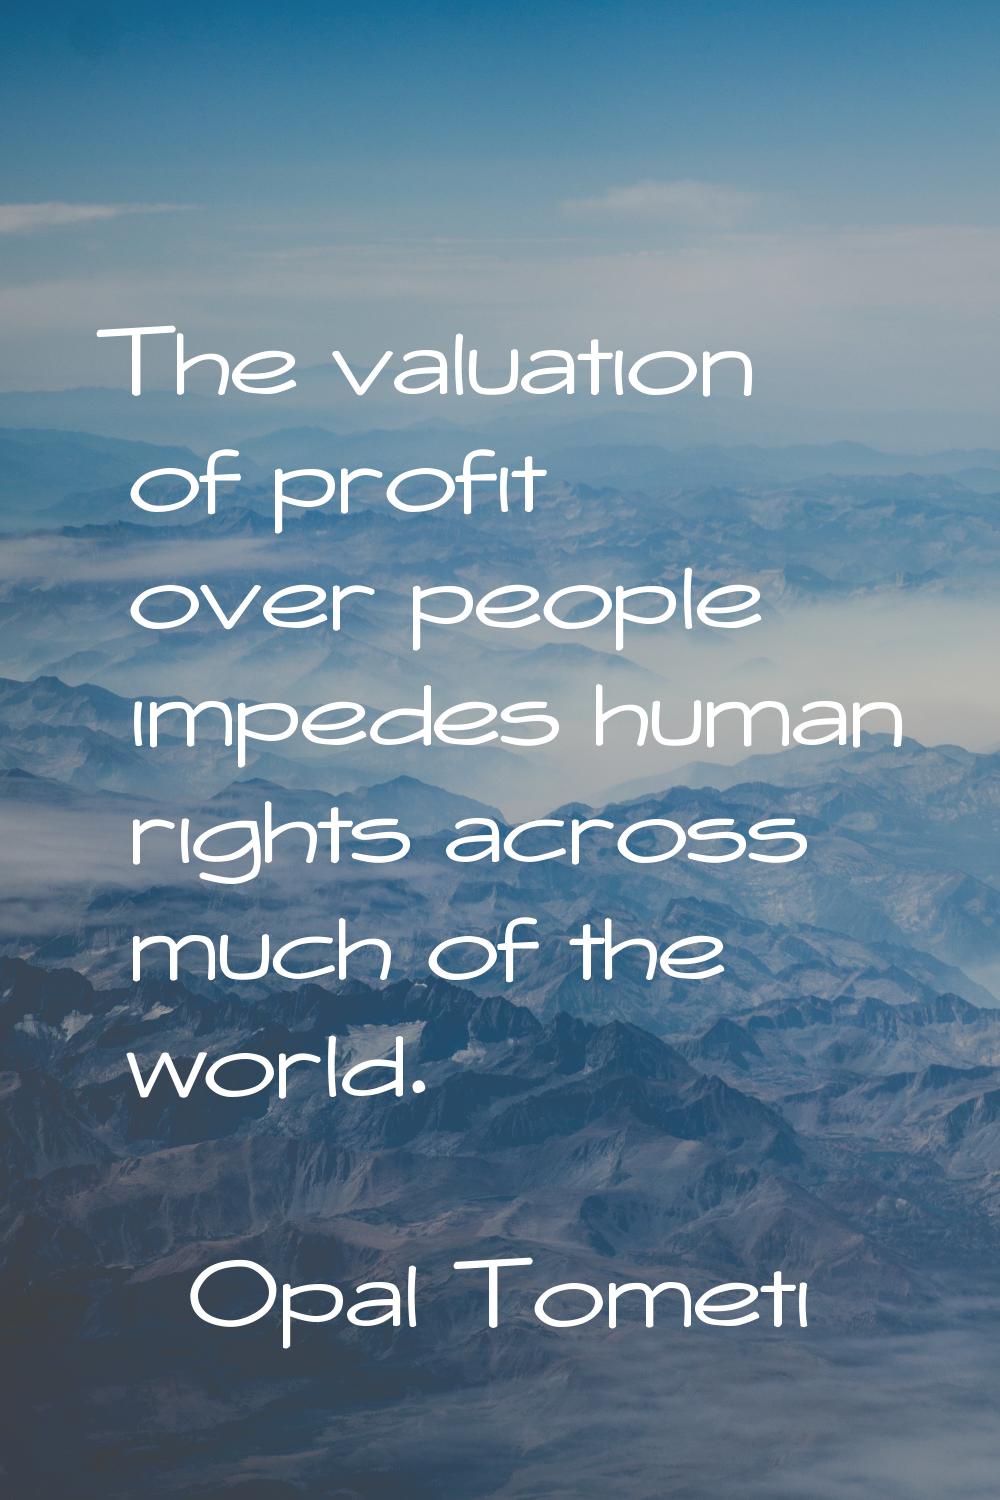 The valuation of profit over people impedes human rights across much of the world.